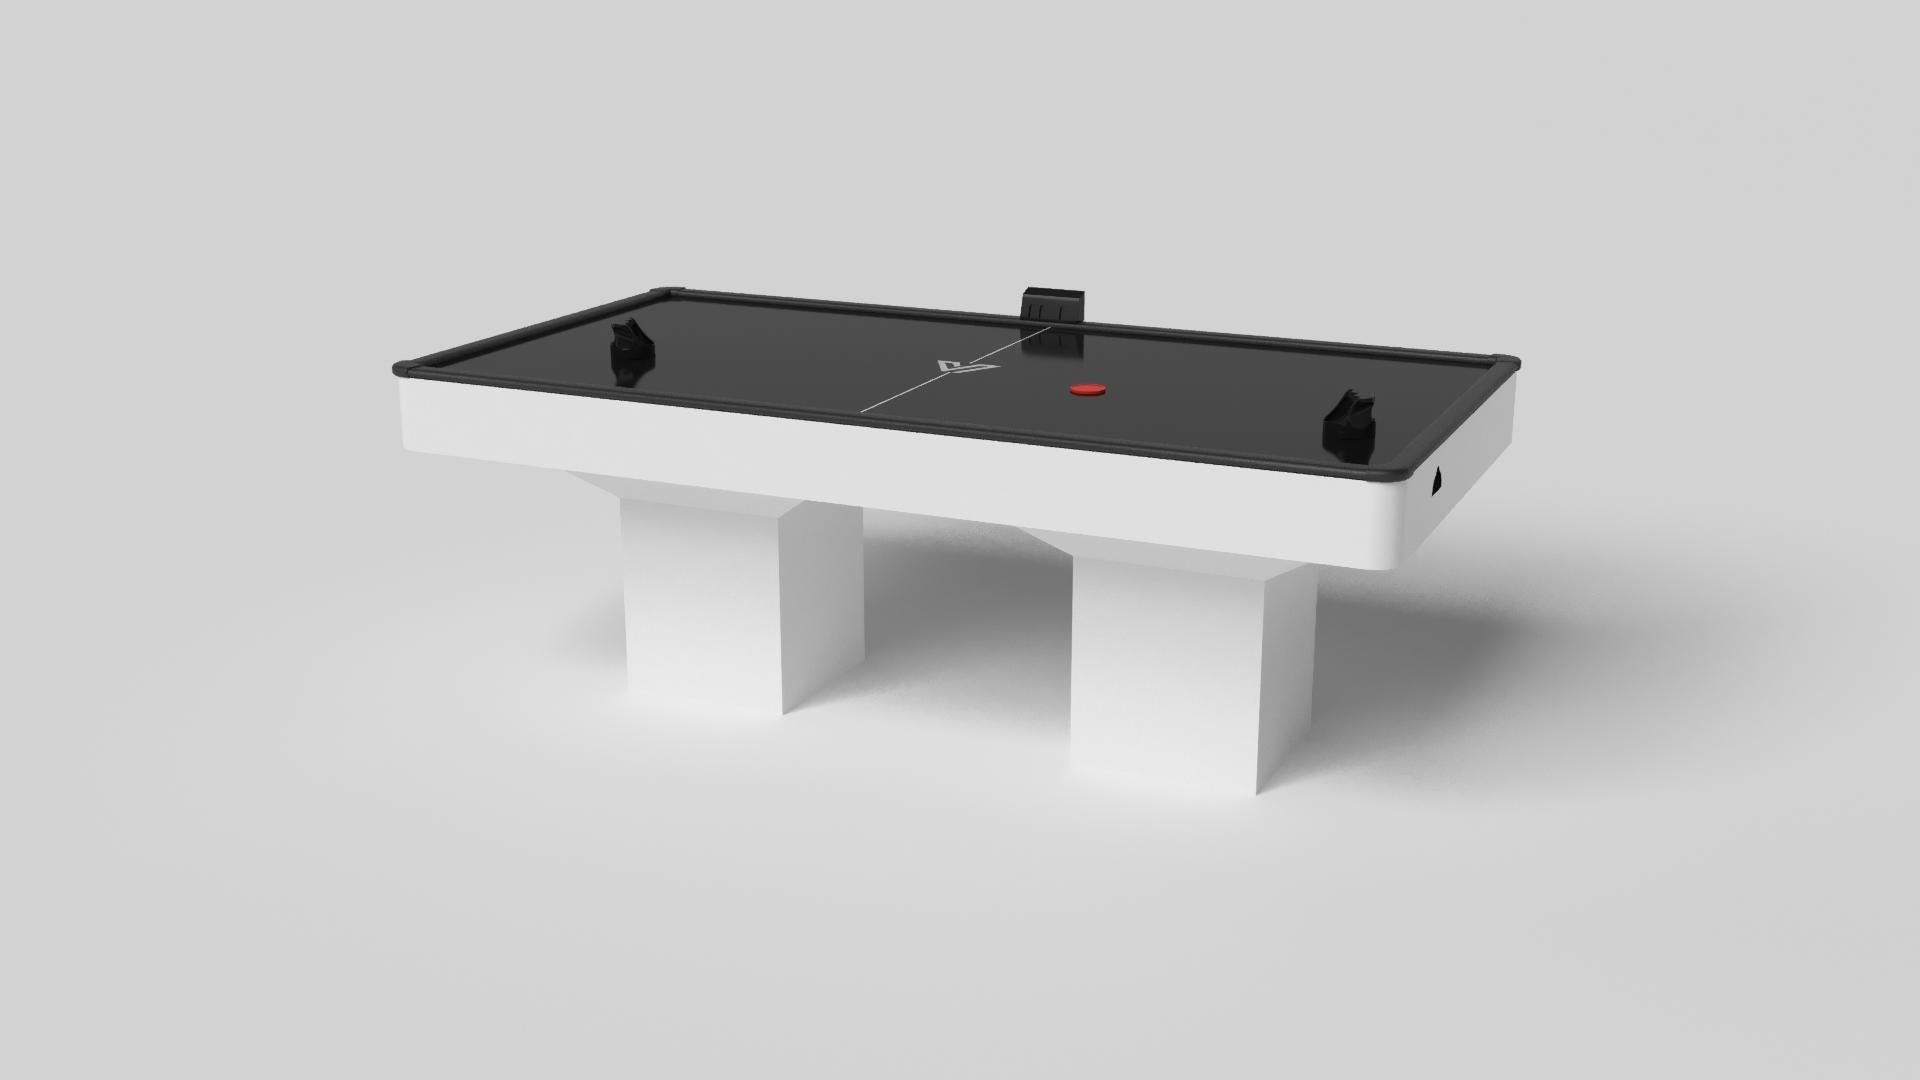 Minimalist design meets opulent elegance in the Trestle air hockey table. Detailed with a professional surface for endless game play, this contemporary table is expertly crafted. Square block legs give it a stark, geometric look that contributes to